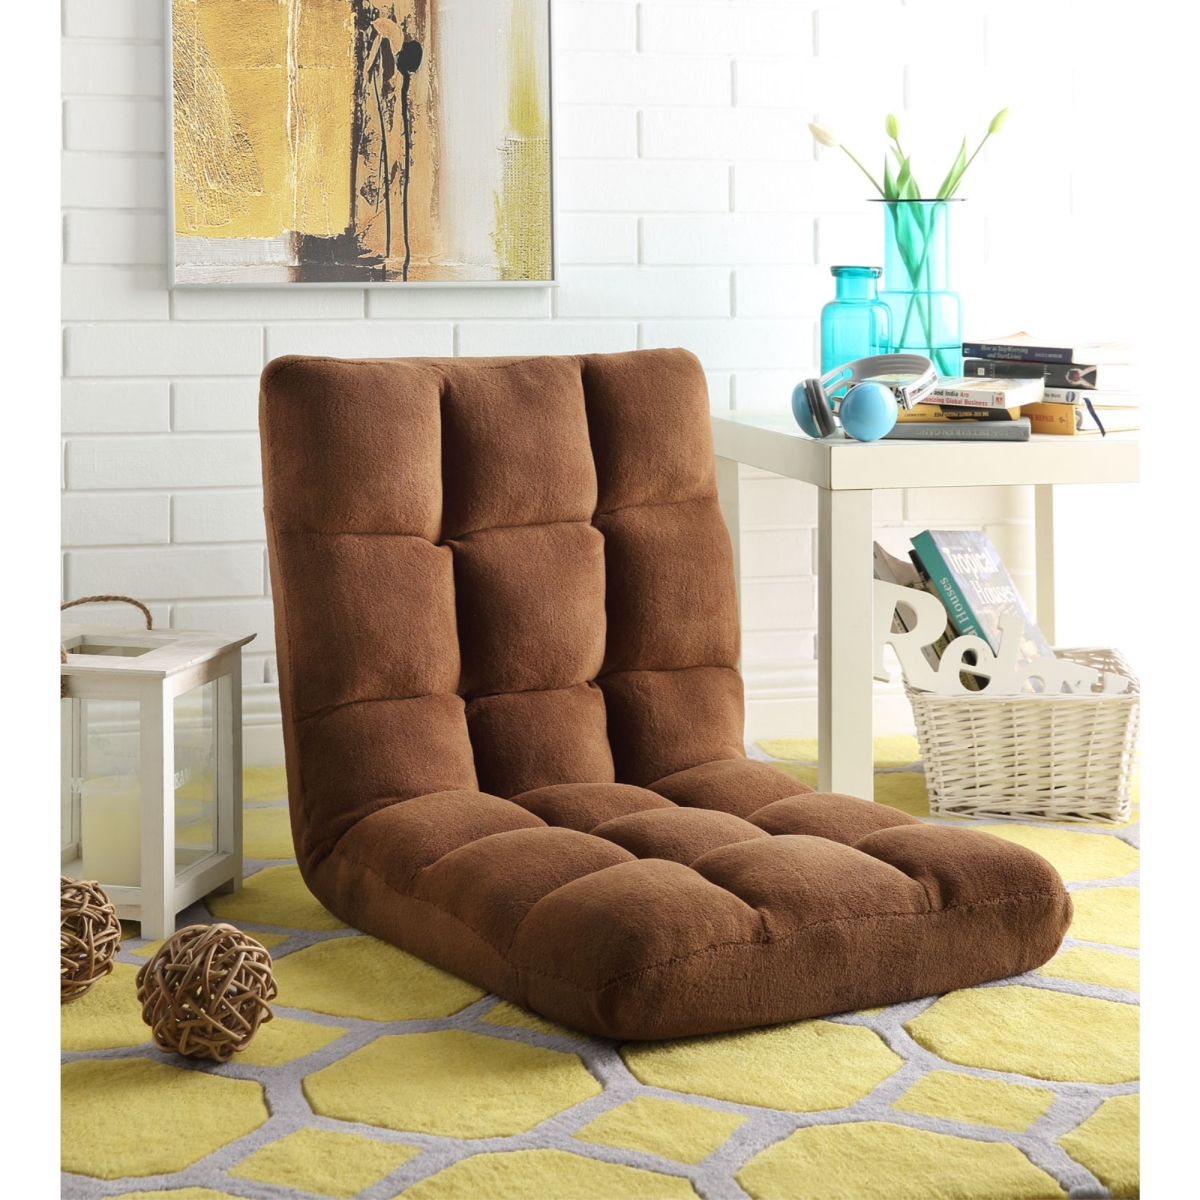 Microplush Modern Armless Quilted Recliner Chair With Foam Filling And Steel Tube Frame - Brown